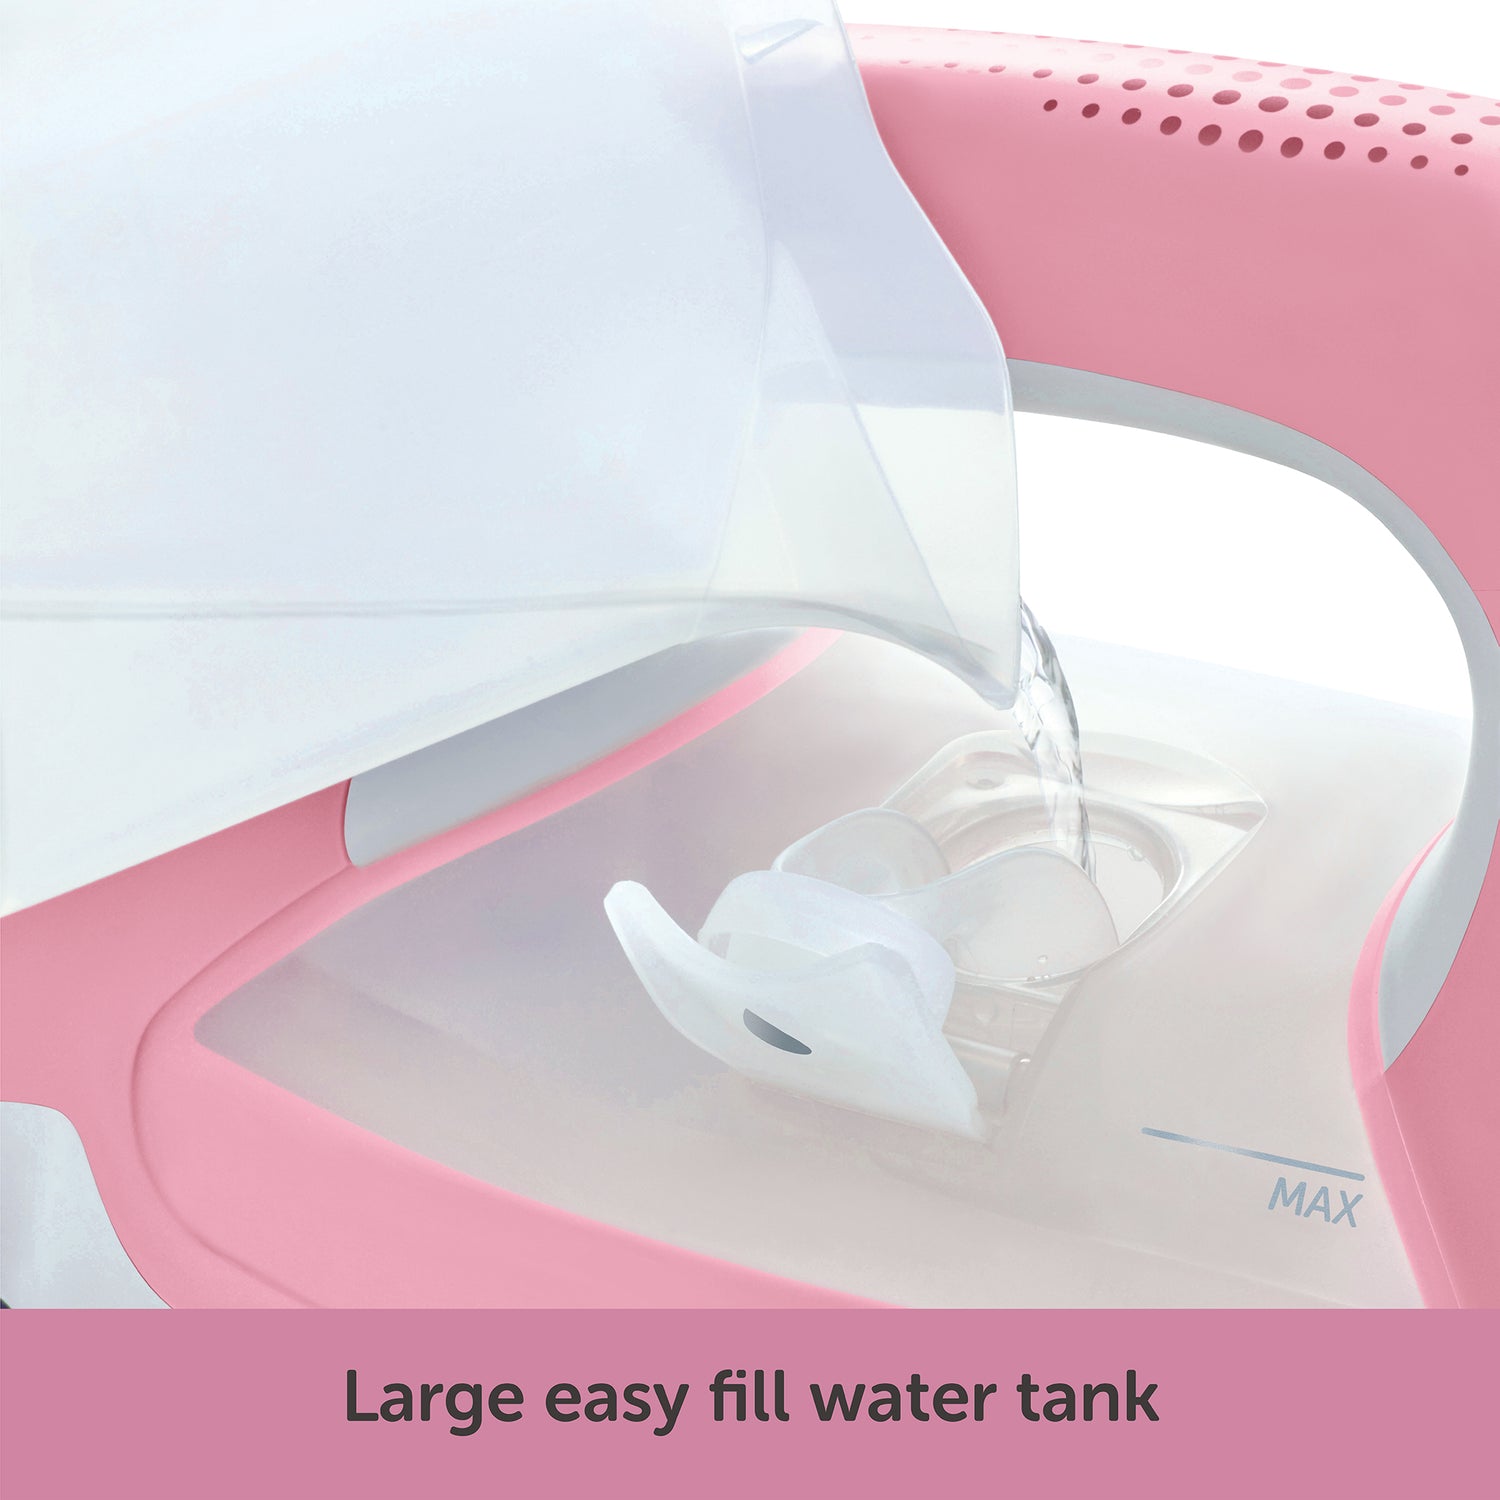 The filler cup pouring water into the large 12.7 once water tank through the convenient side filling door.